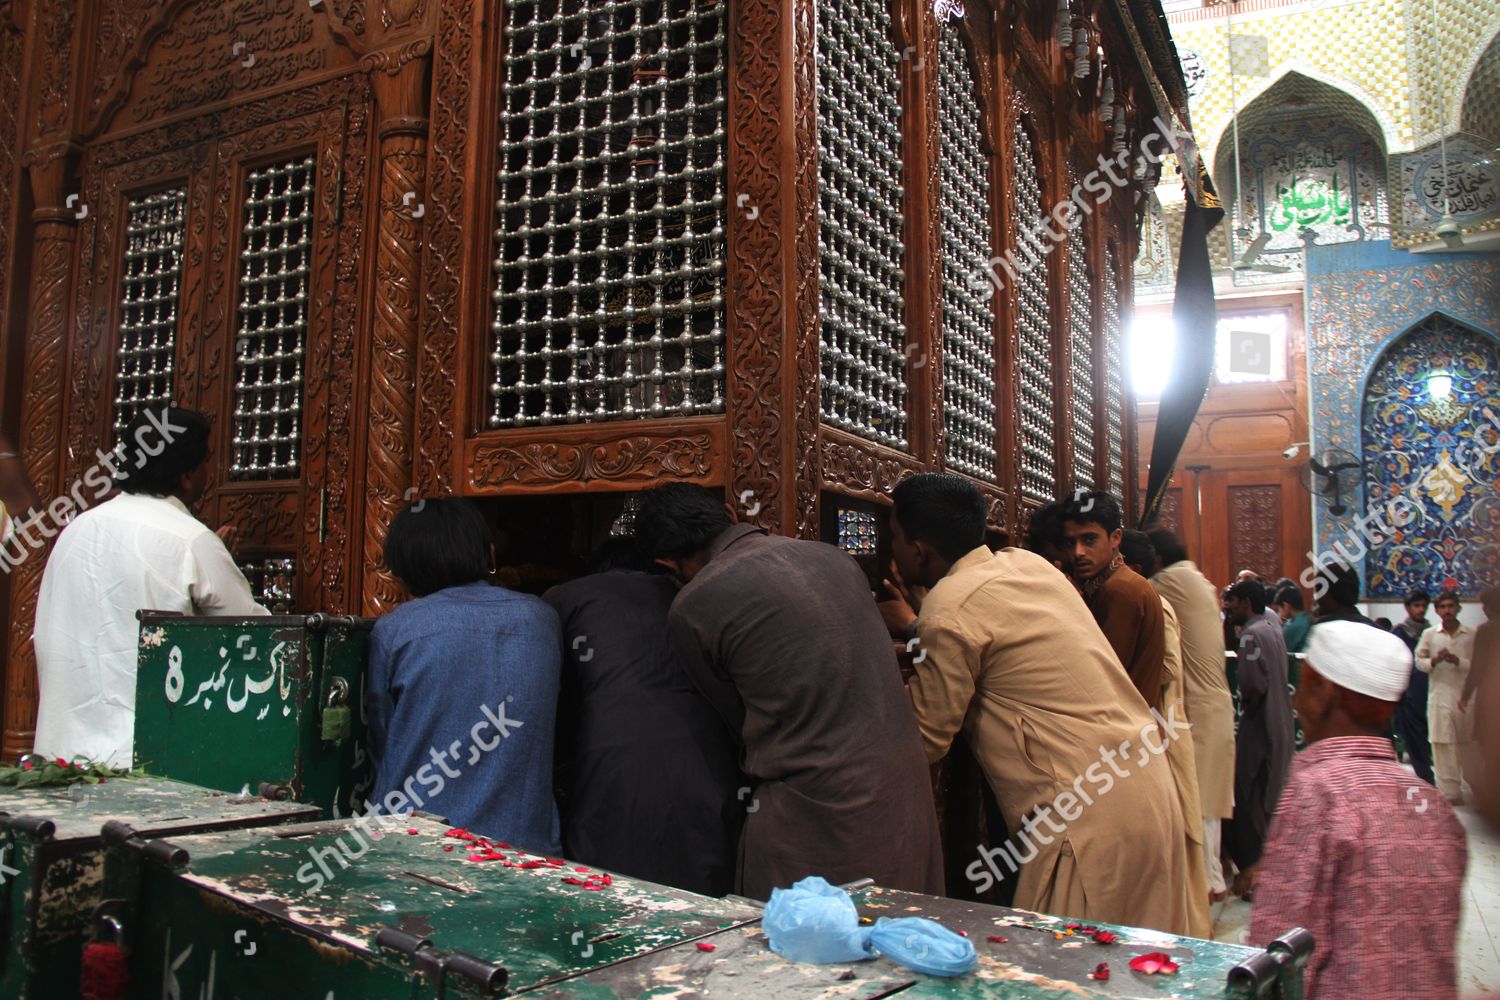 suicide-bombing-at-the-shrine-of-lal-shahbaz-qalandar-kills-at-least-80-people-sehwan-pakistan-shutterstock-editorial-8410939g.jpg